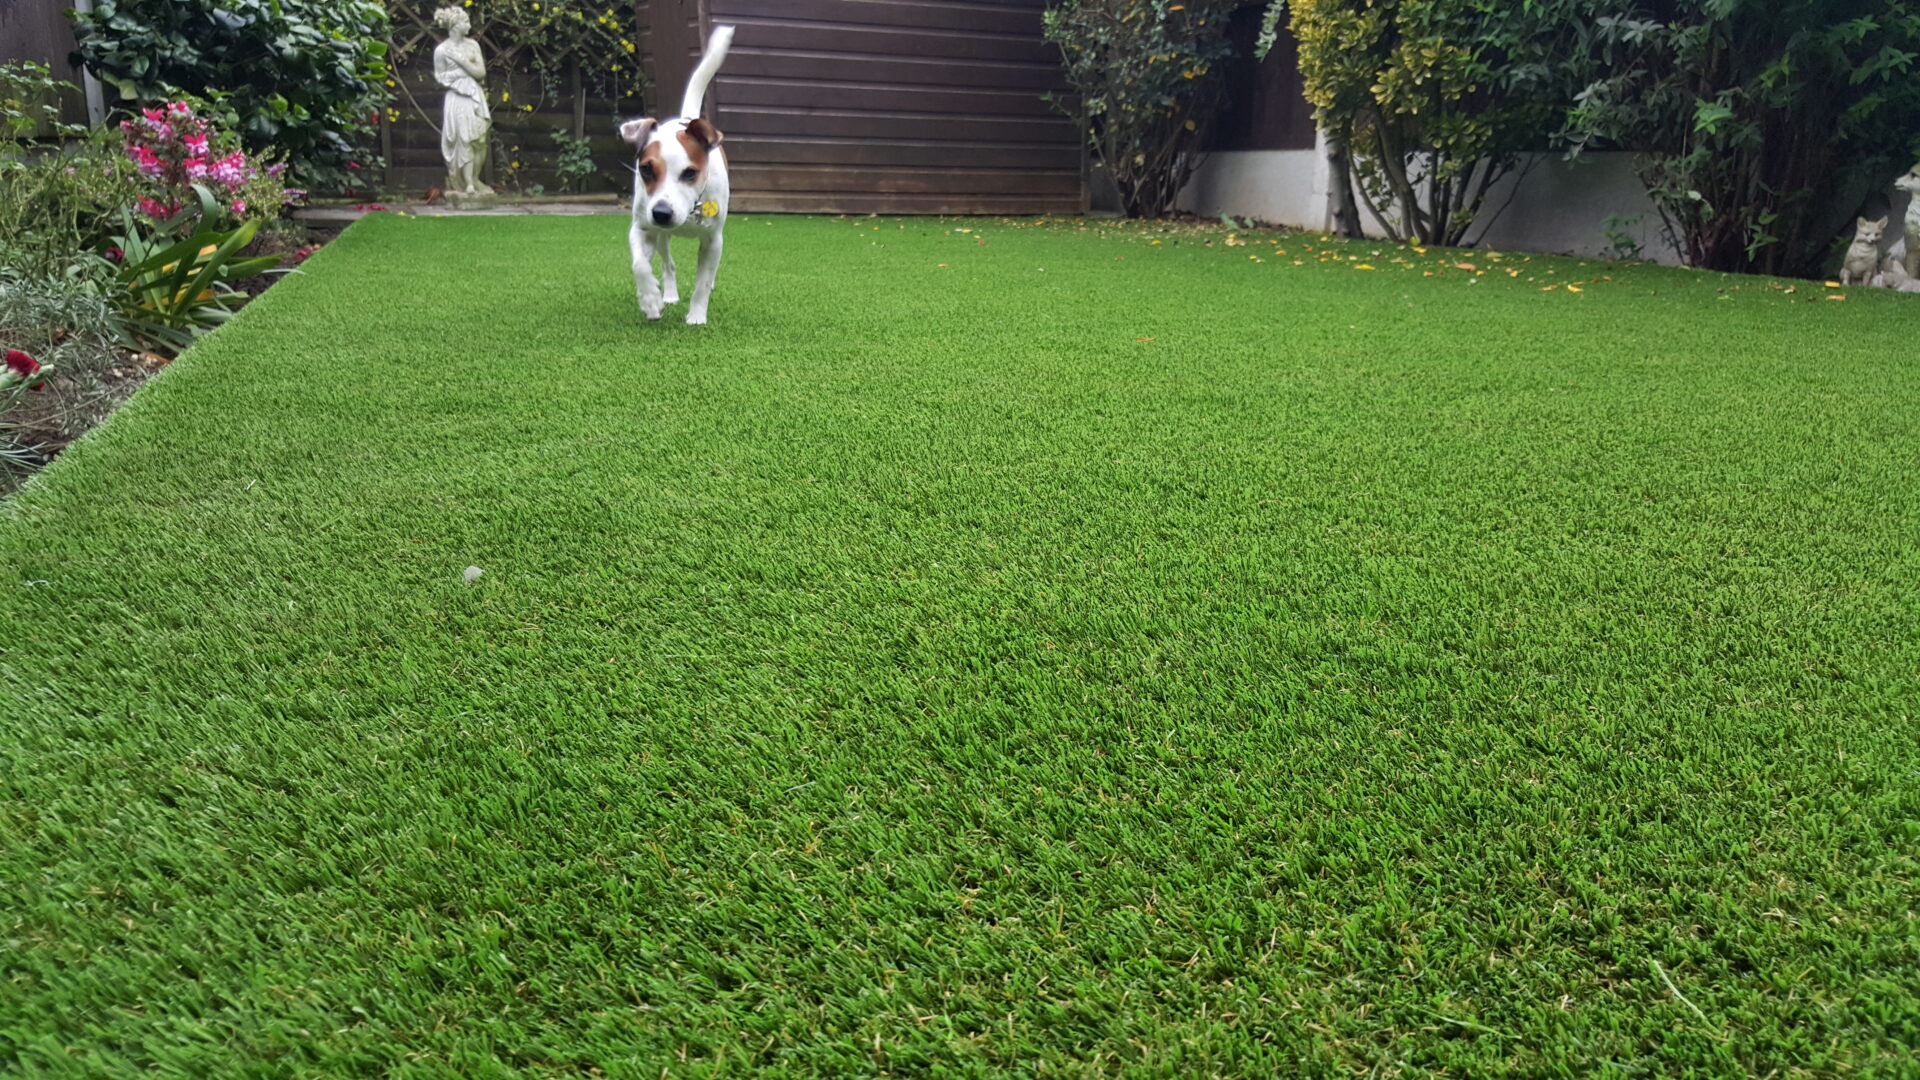 Benefits Of Premium Grass Blades’ Artificial Turf For Pet Owners